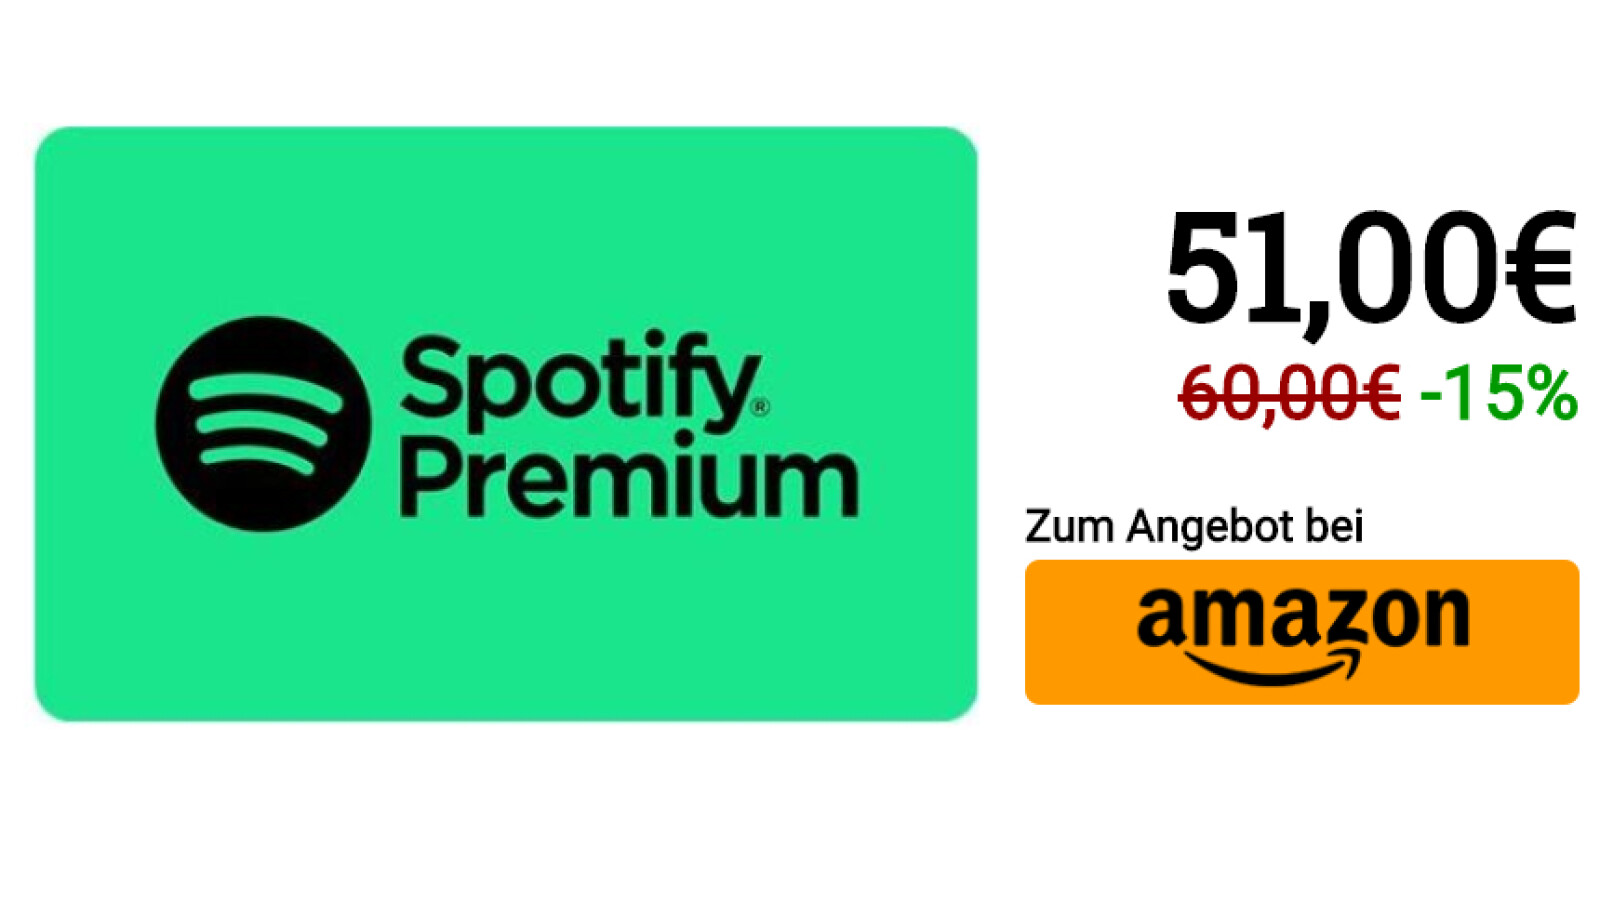 how much is spotify premium per year